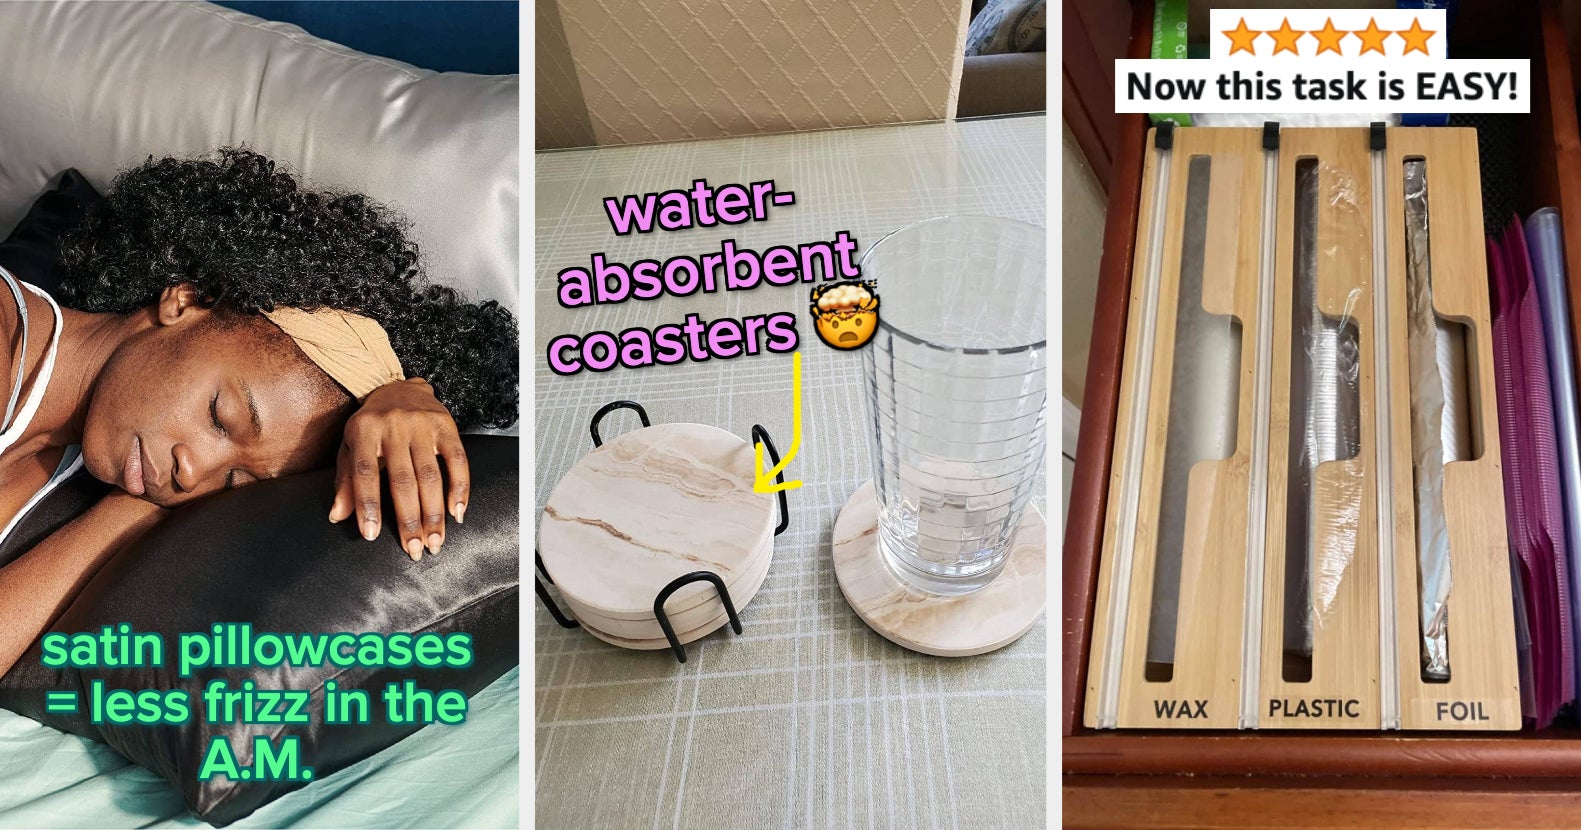 54 Home Items That'll Make Life Easier